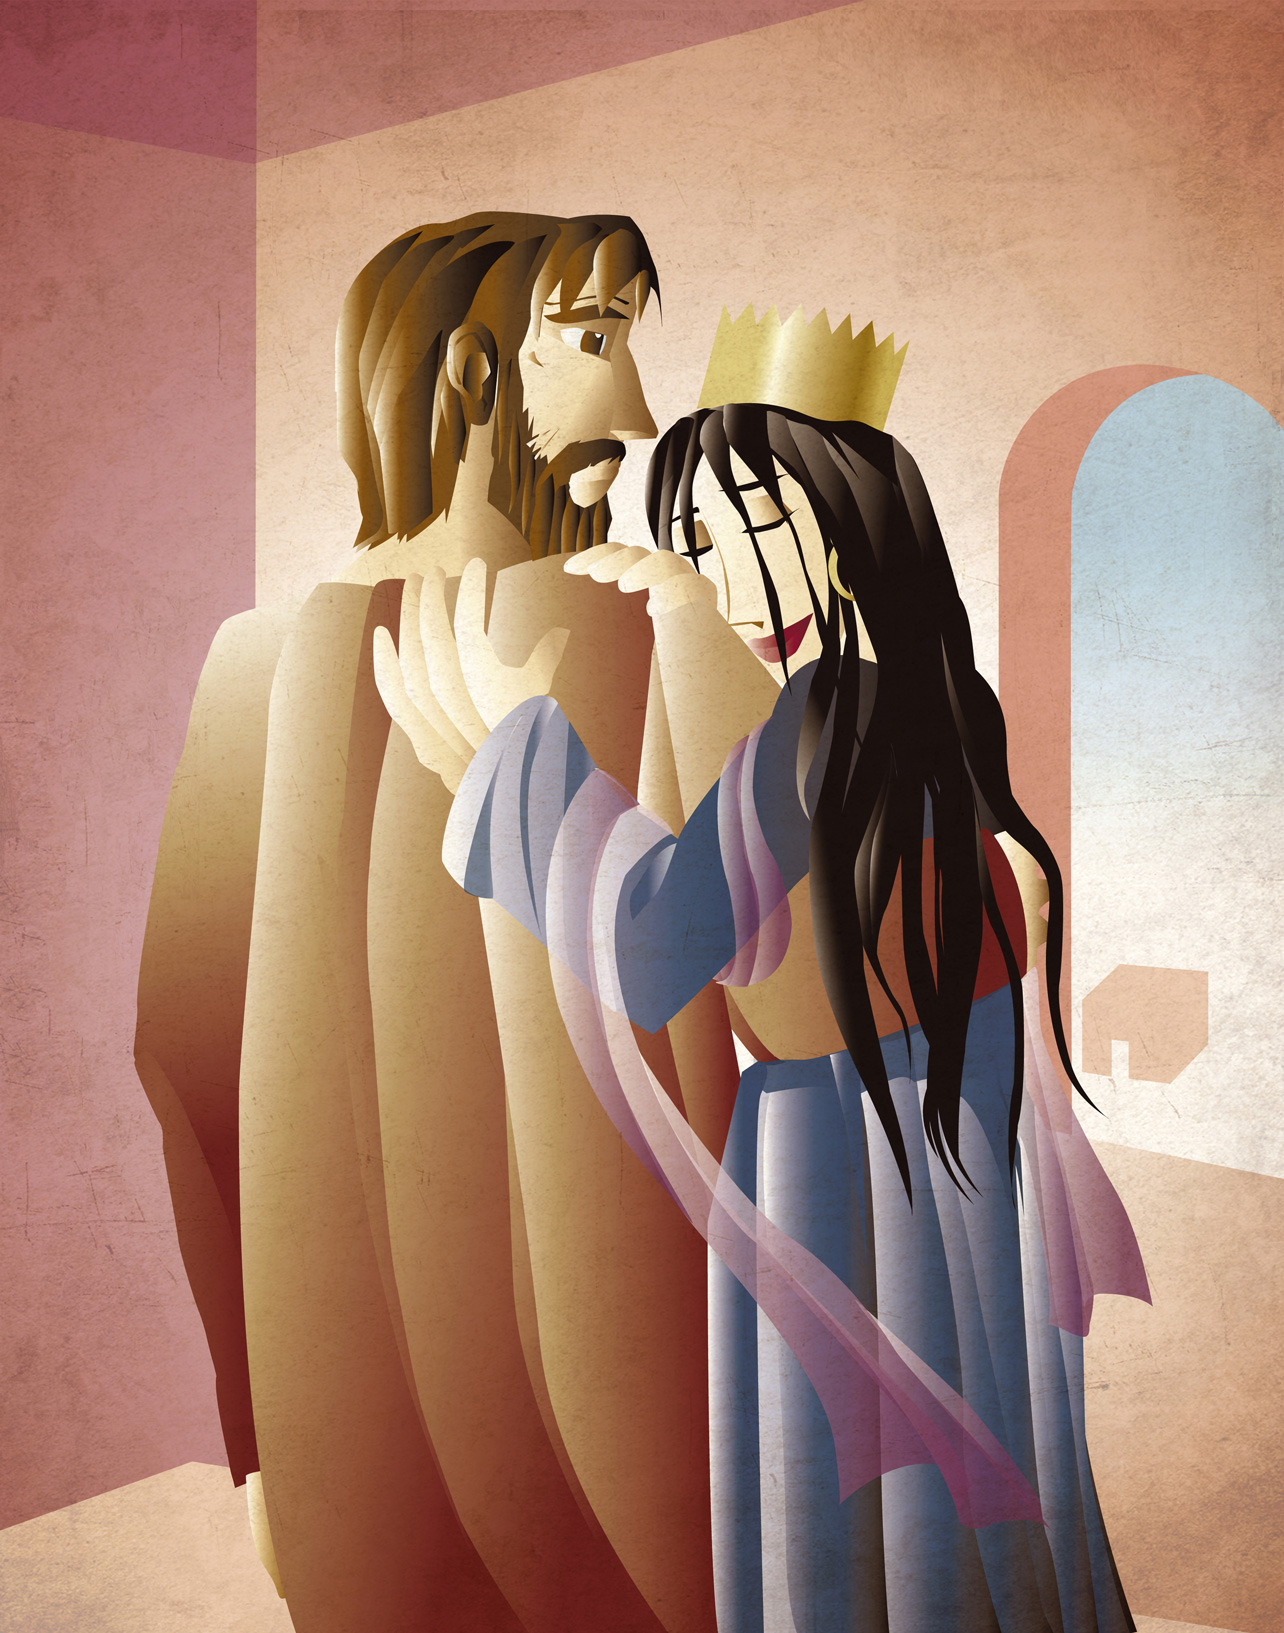 Vector illustration of Queen Esther and her Uncle Mordecai embracing after Haman's defeat. Inspired by the events following Esther Chapter 7.